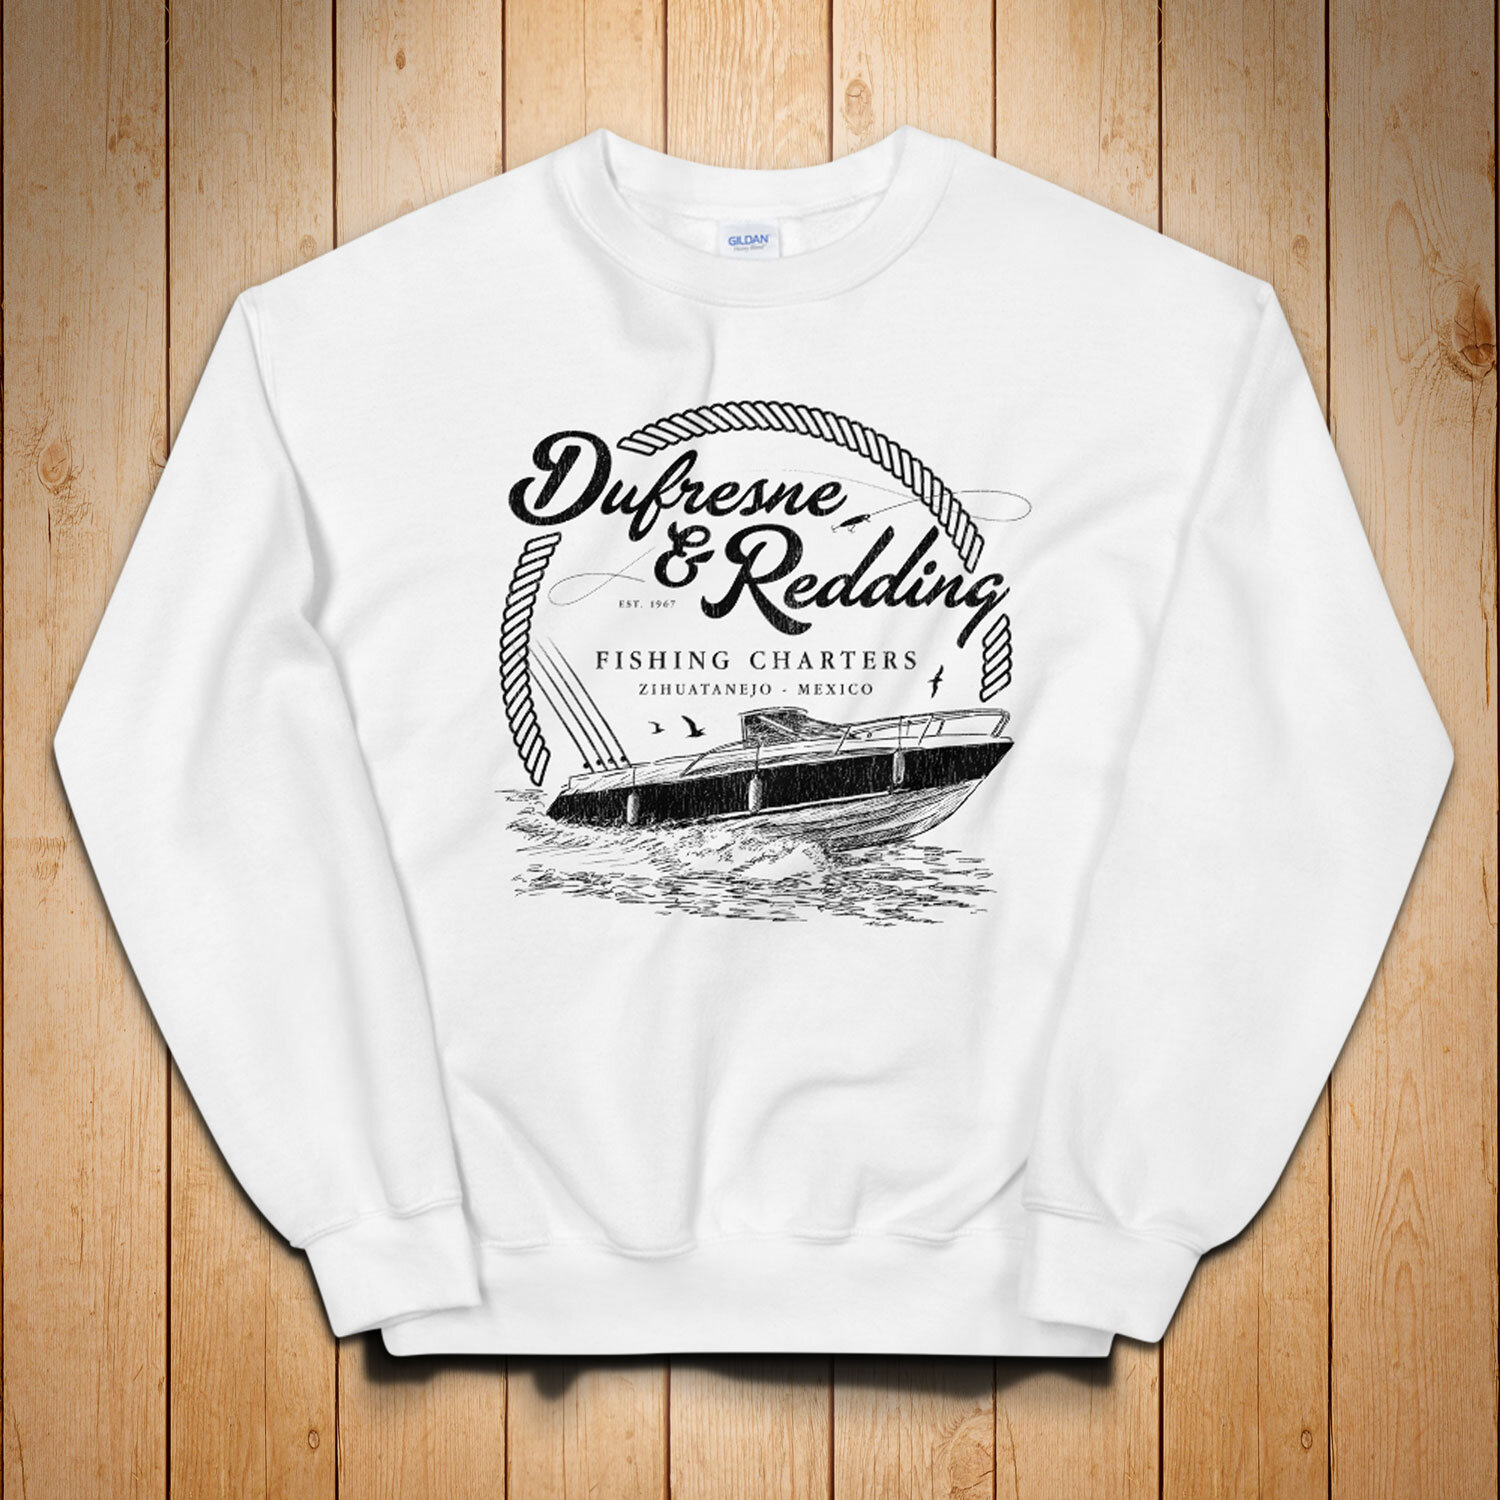 Dufresne & Redding Fishing Charters sweater inspired by The Shawshank  Redemption - Sweatshirt — MoviTees